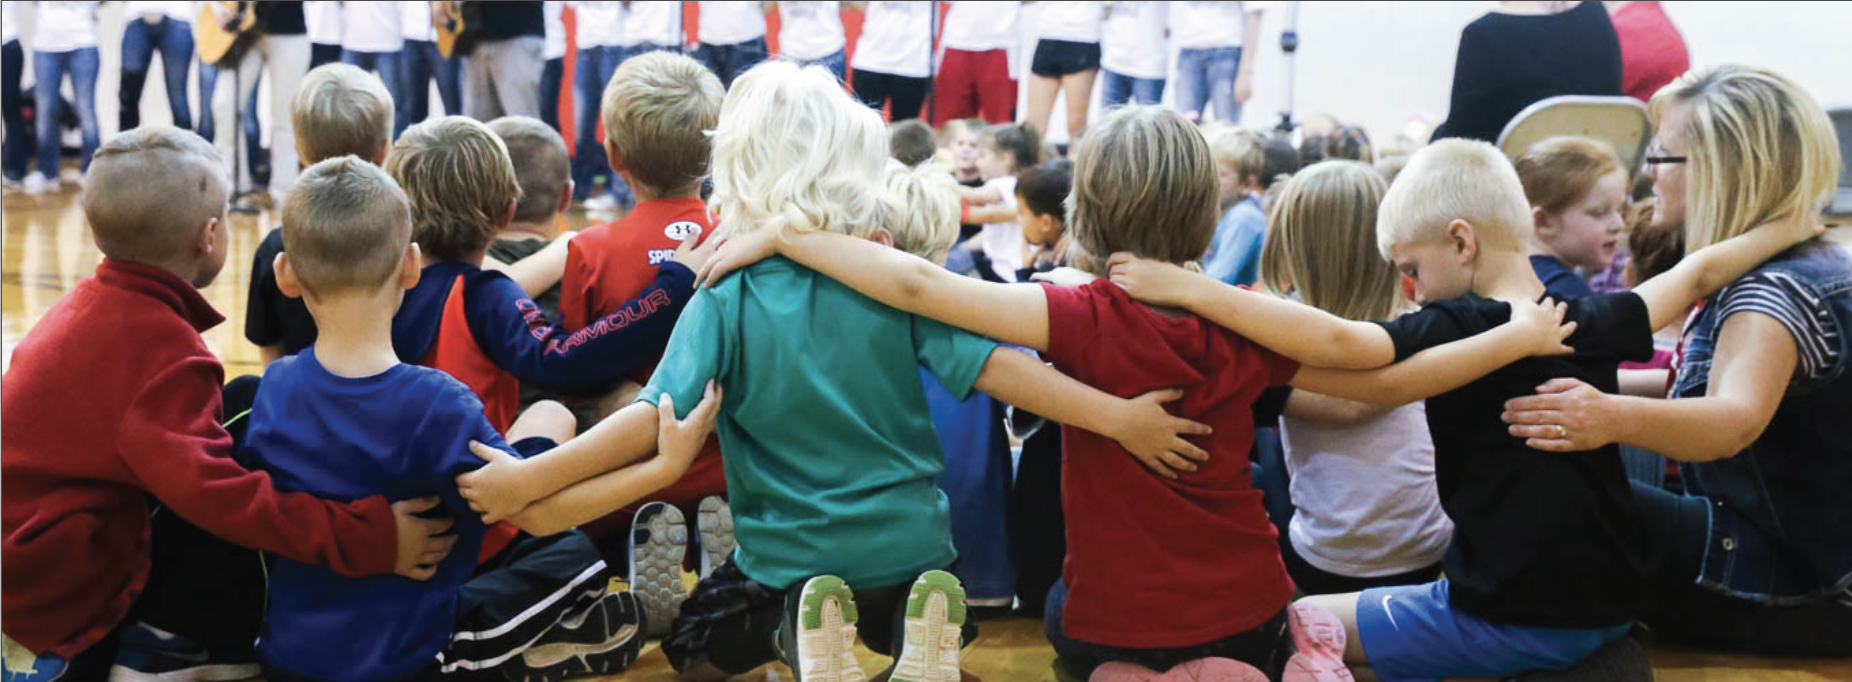 children huddled with arms around one another